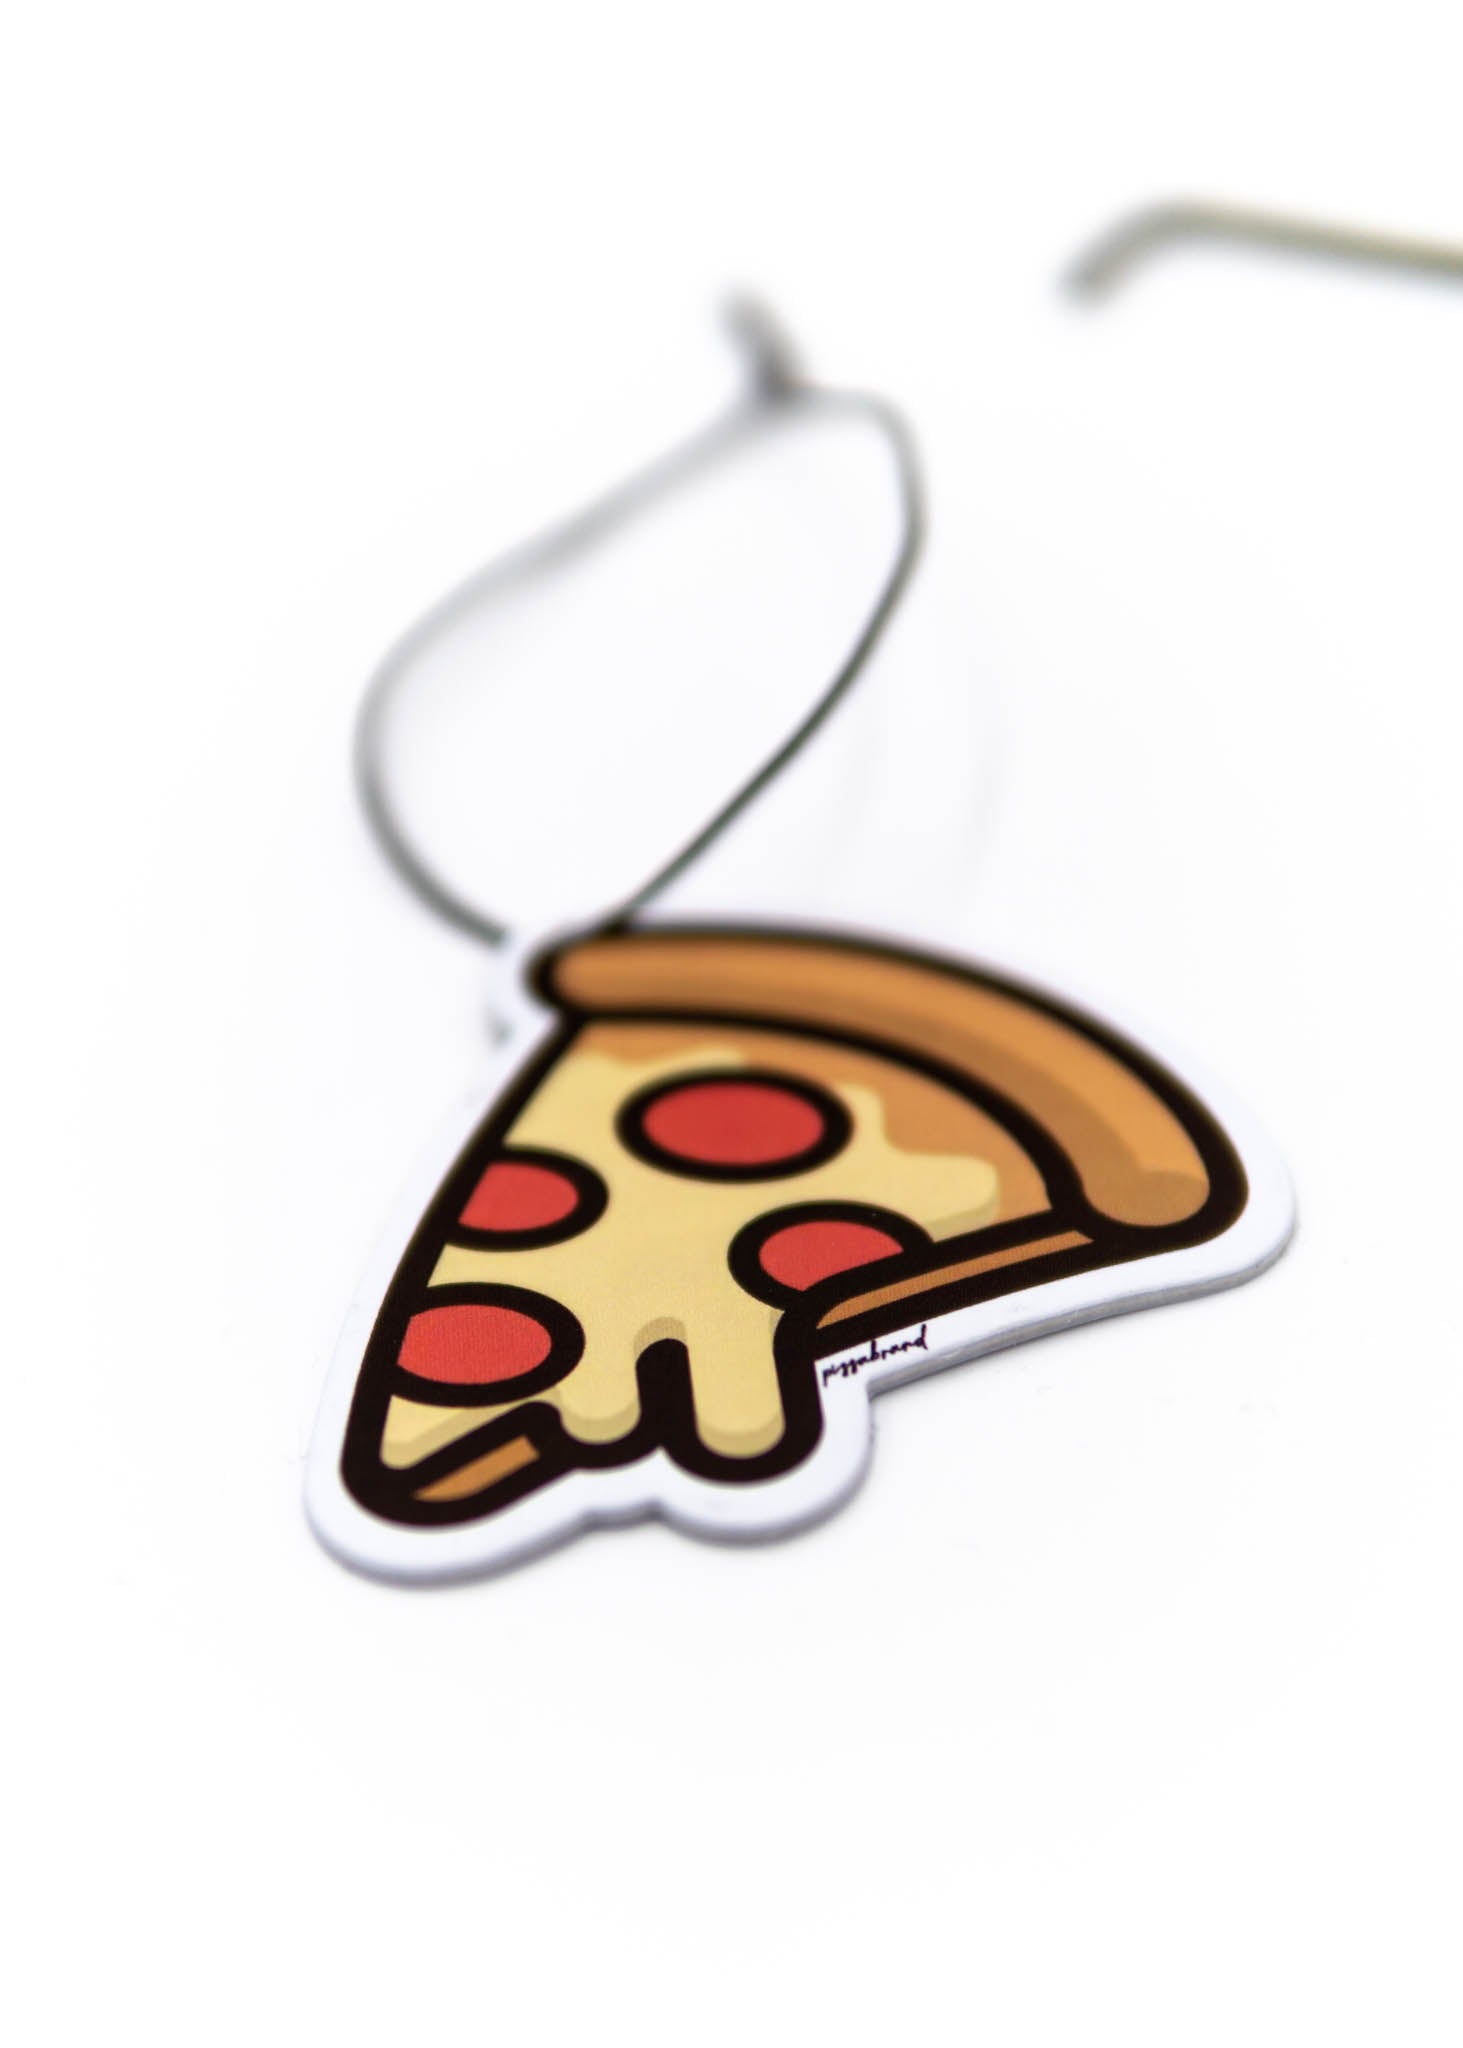 A pizzabrand pepperoni pizza air freshener. Photo is a close up of the car air freshener with string.